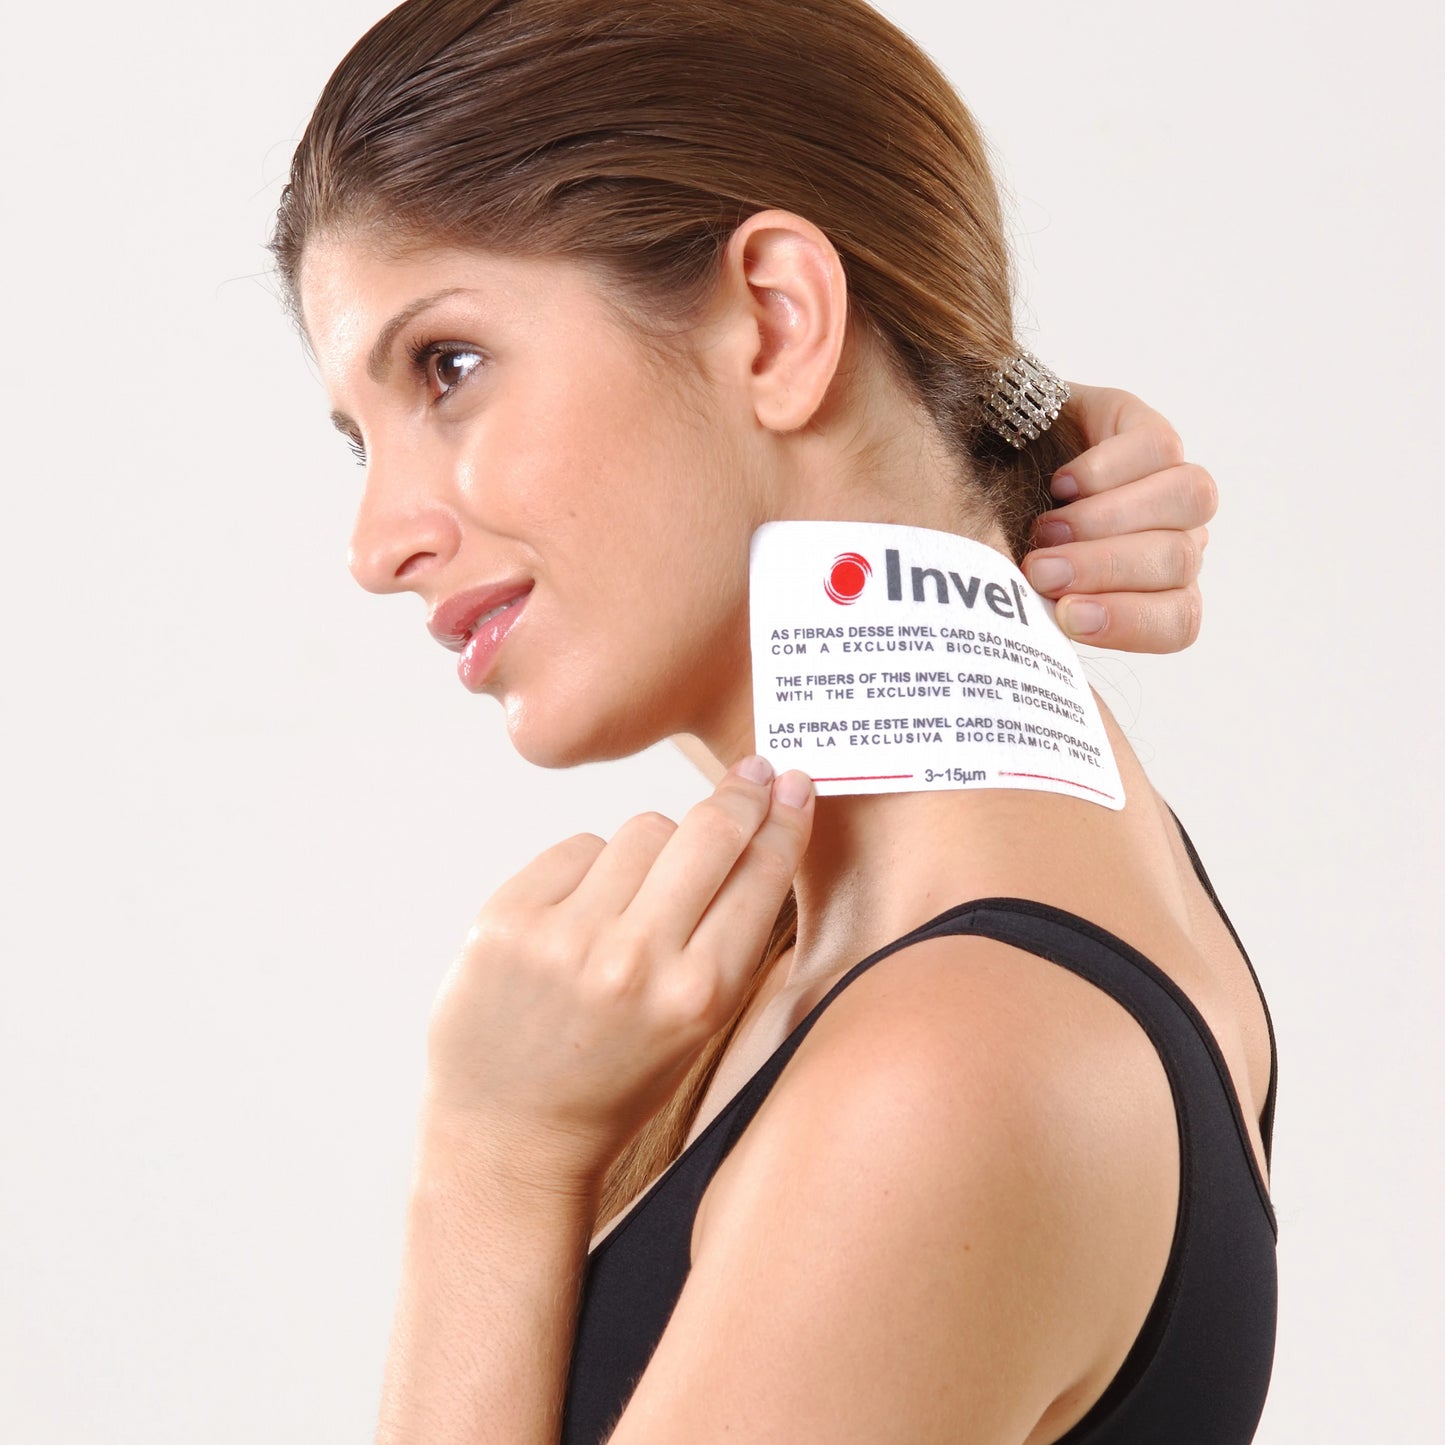 Invel Therapeutic Cards with Bioceramic MIG3 Far-Infrared Technology  (3 Units) - Invel North America